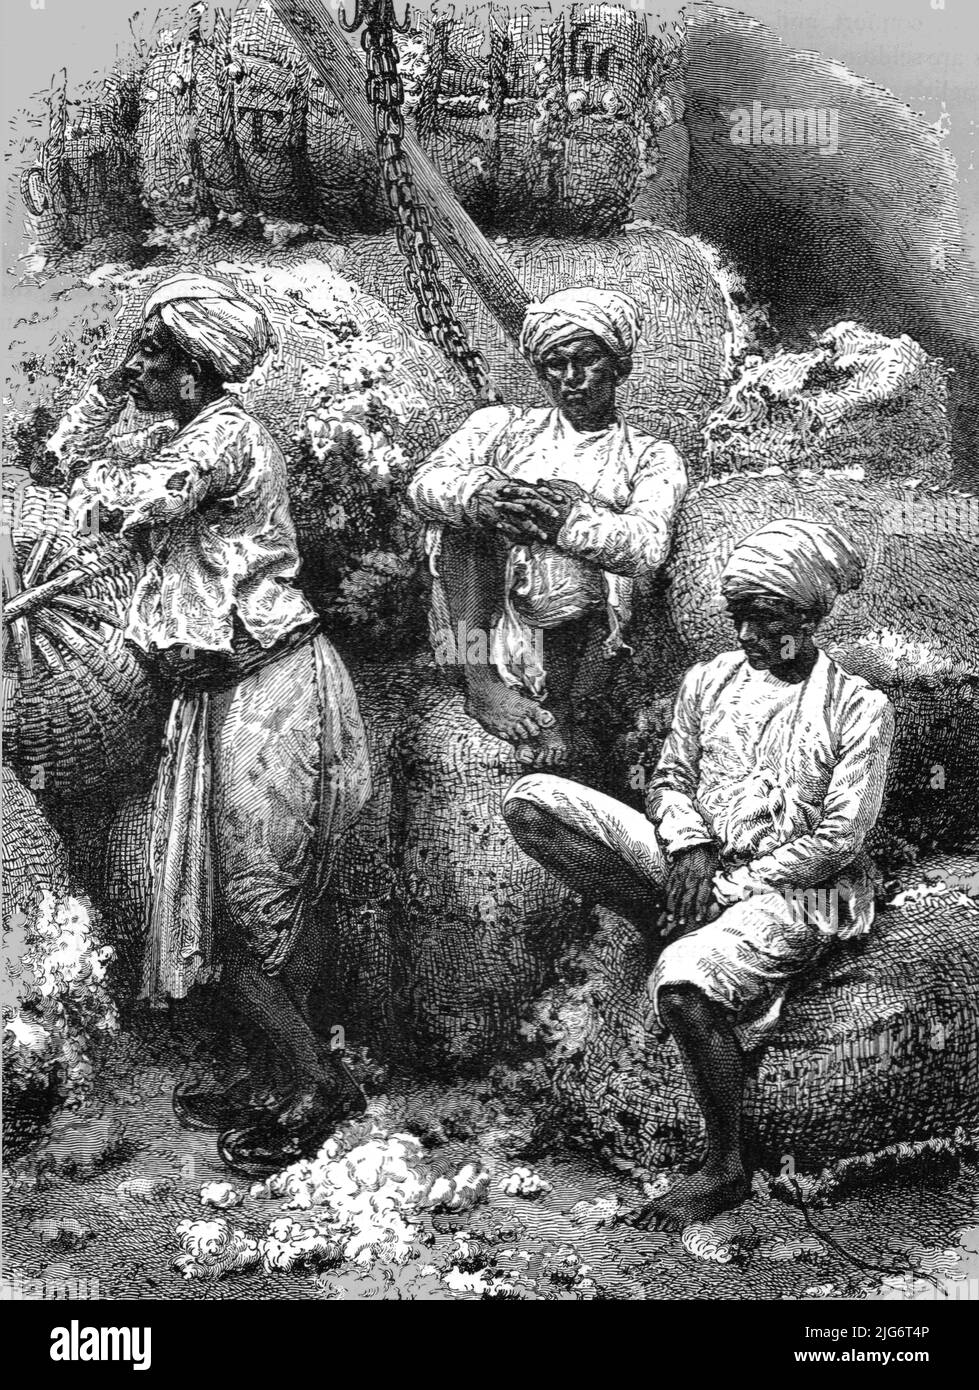 'Cotton-Store and Coolies, Bombay; Notes on Bombay and the Malabar Coast', 1875. [Workers at a cotton warehouse in what is now Mumbai, India]. From, 'Illustrated Travels' by H.W. Bates. [Cassell, Petter, and Galpin, c1880, London] Belle Sauvage Works.London E.C. Stock Photo